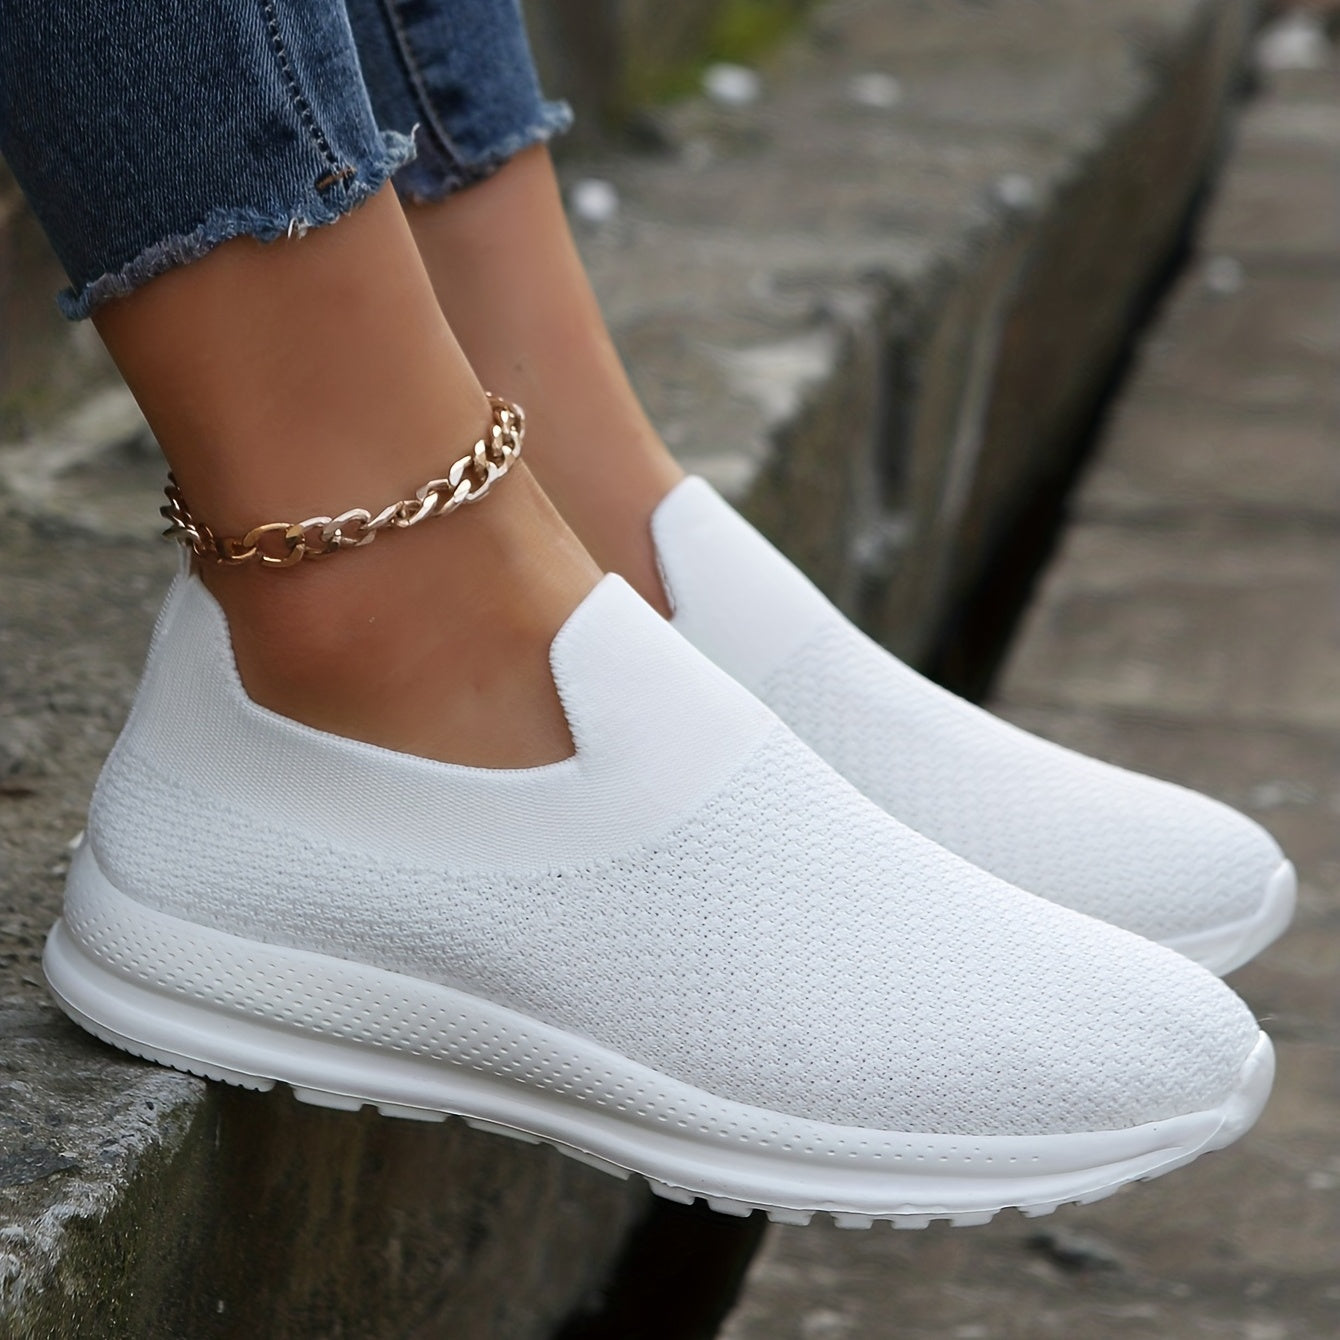 「lovevop」Women's White Flying Woven Sneakers, Breathable Low Top Slip On Walking Shoes, Women's Anti-skid Shoes